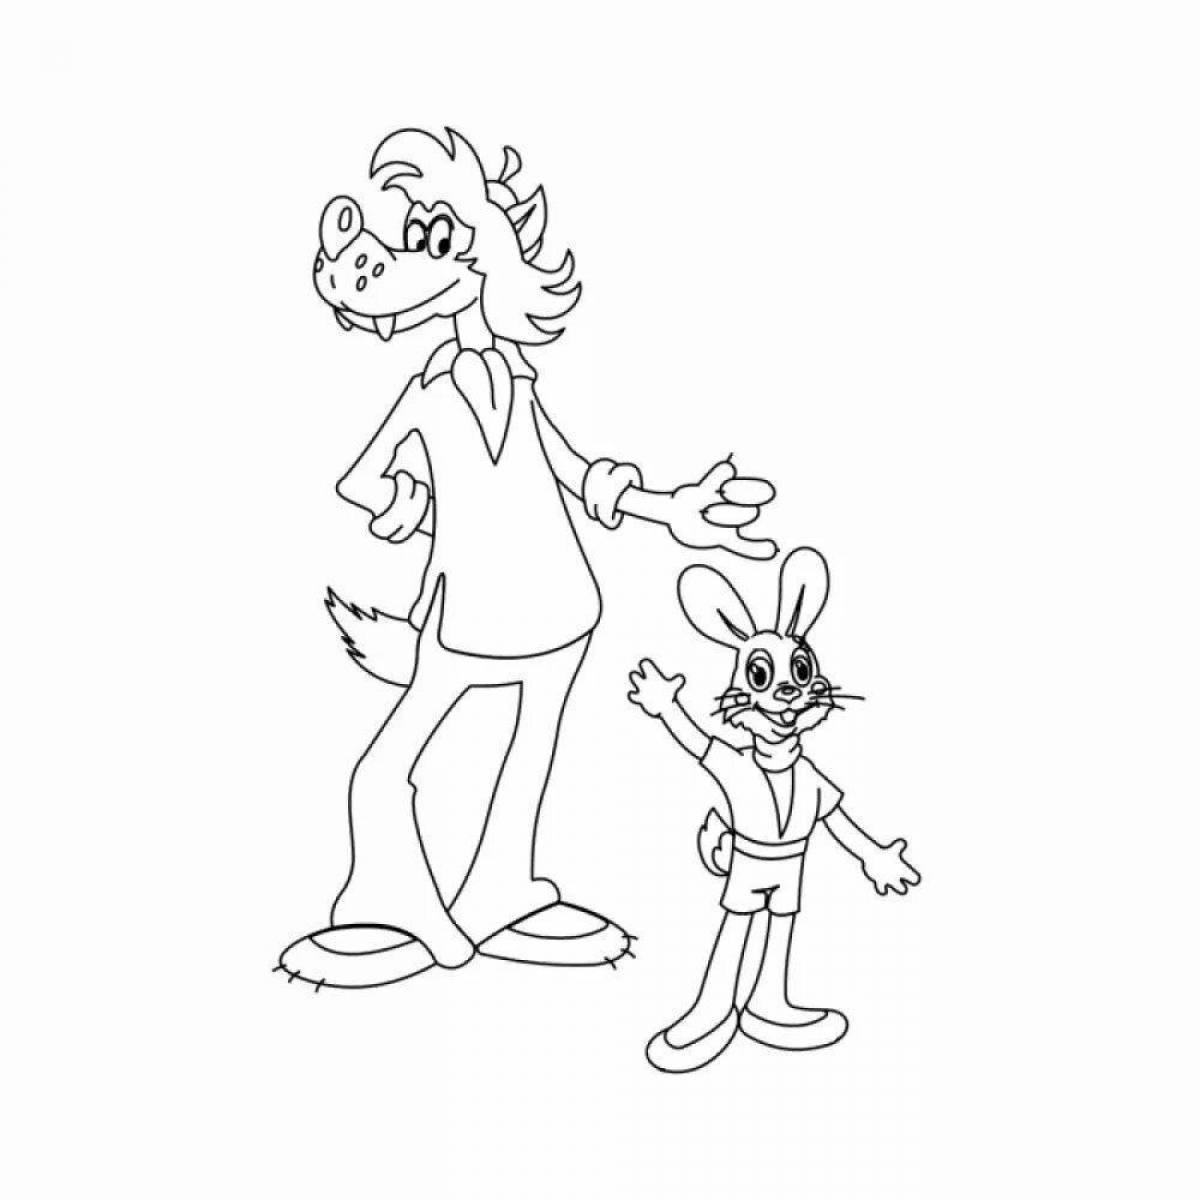 Animated coloring page oh wait